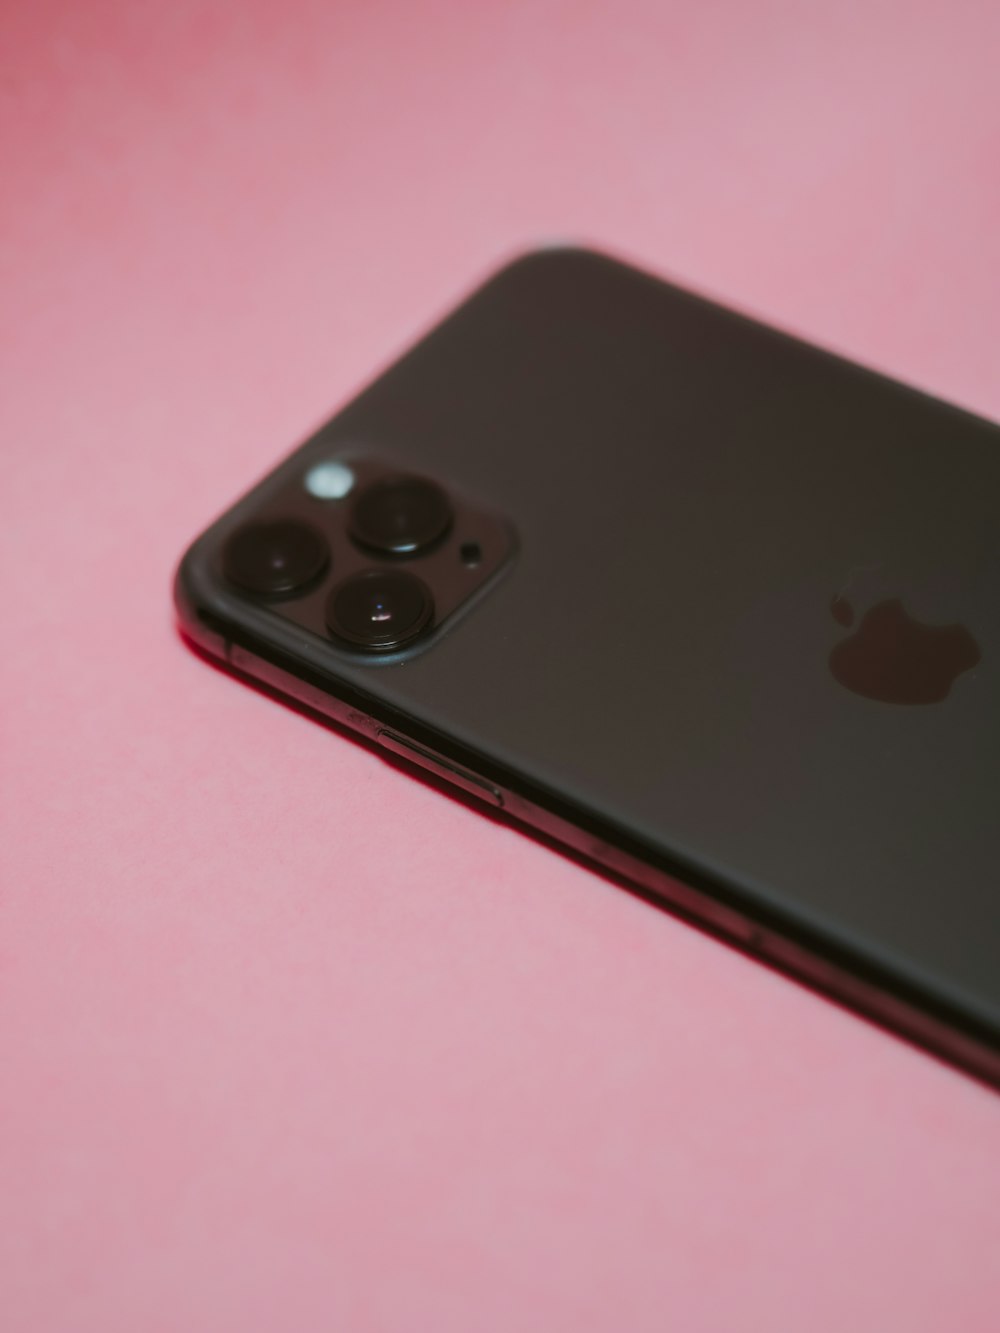 black iphone 7 on pink table